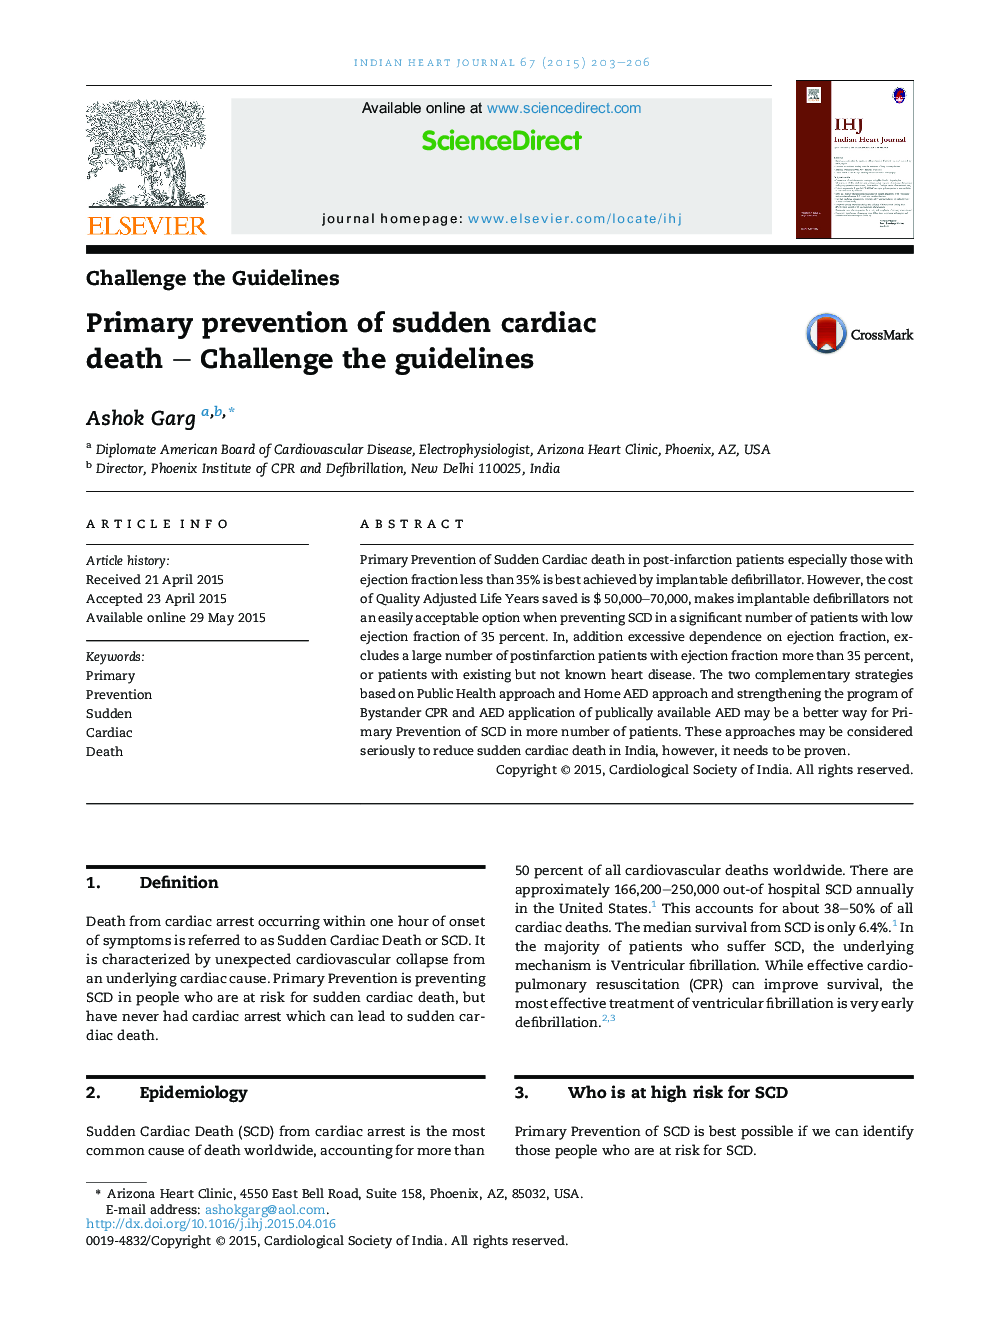 Primary prevention of sudden cardiac death – Challenge the guidelines